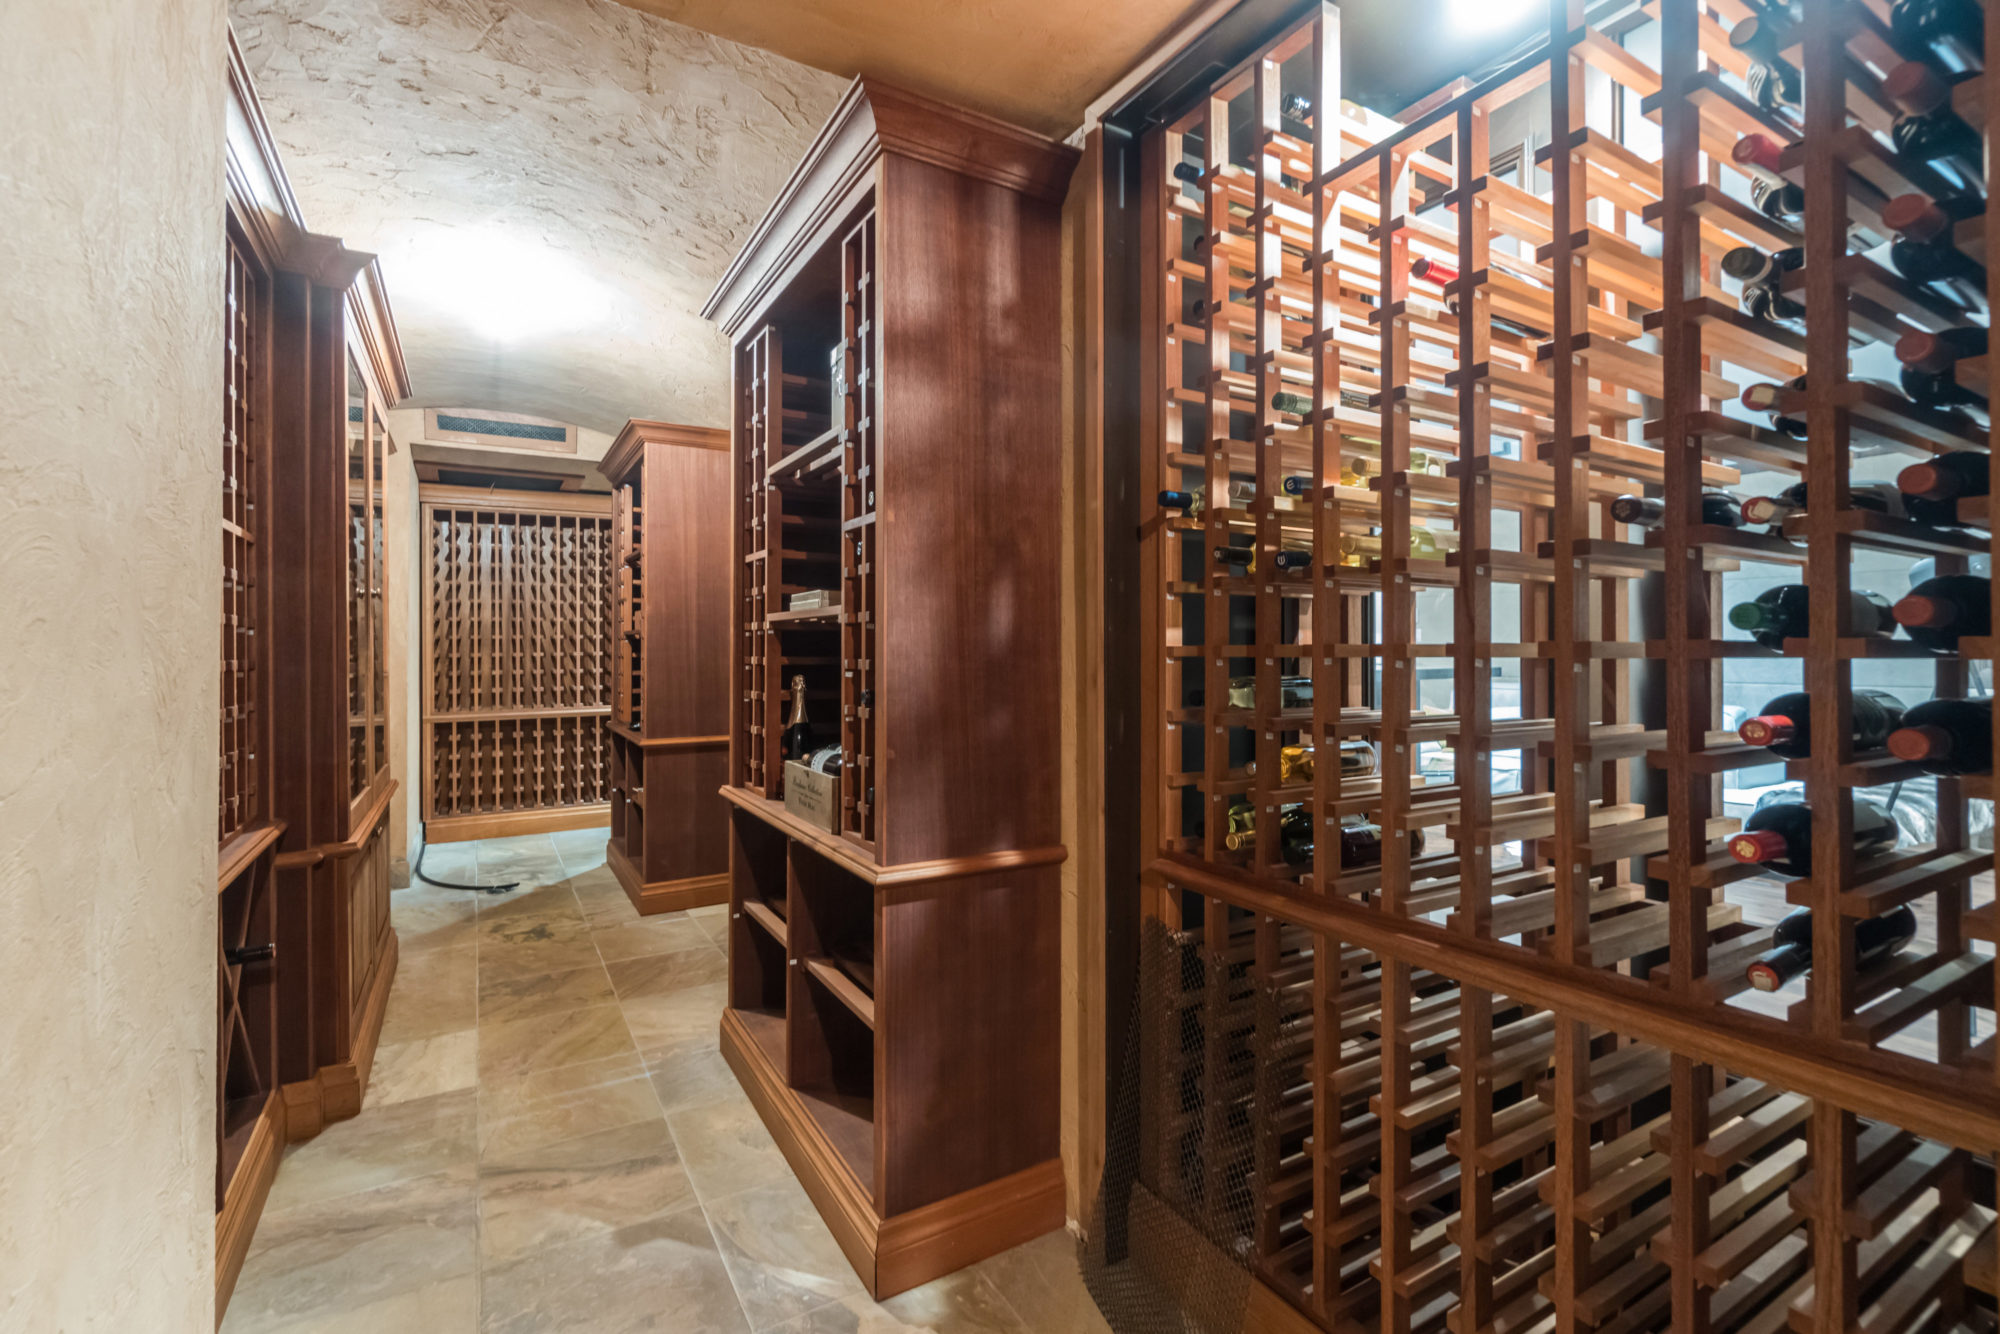 The climate-controlled wine cellar is is the size of a two-bedroom apartment. 